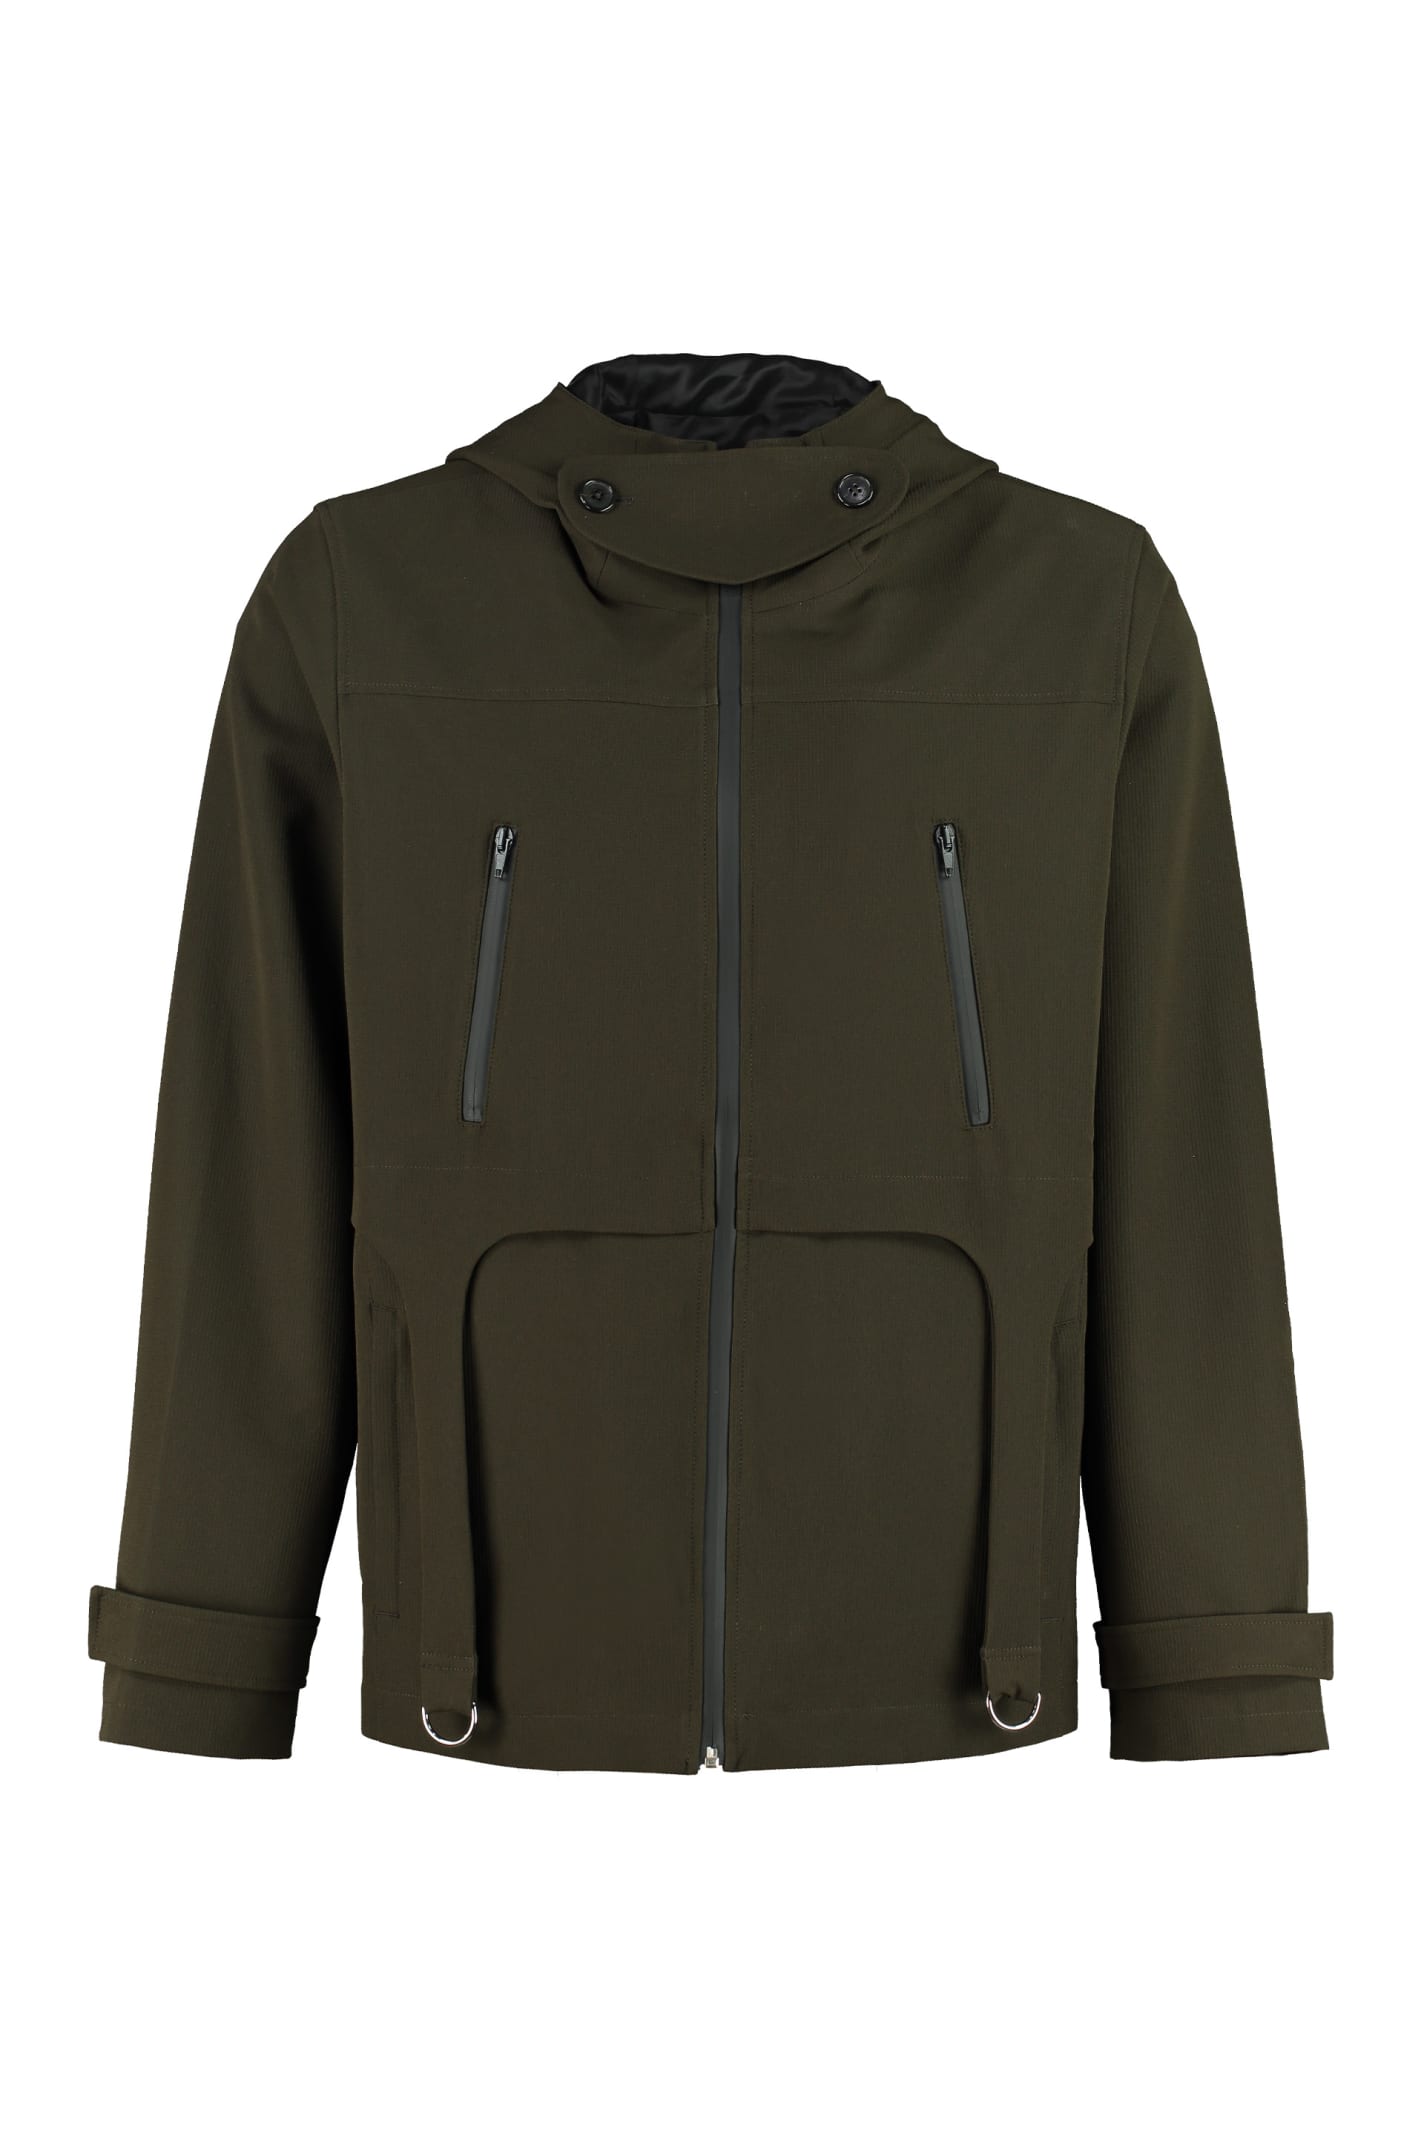 Jacquemus Draio Technical Fabric Hooded Jacket